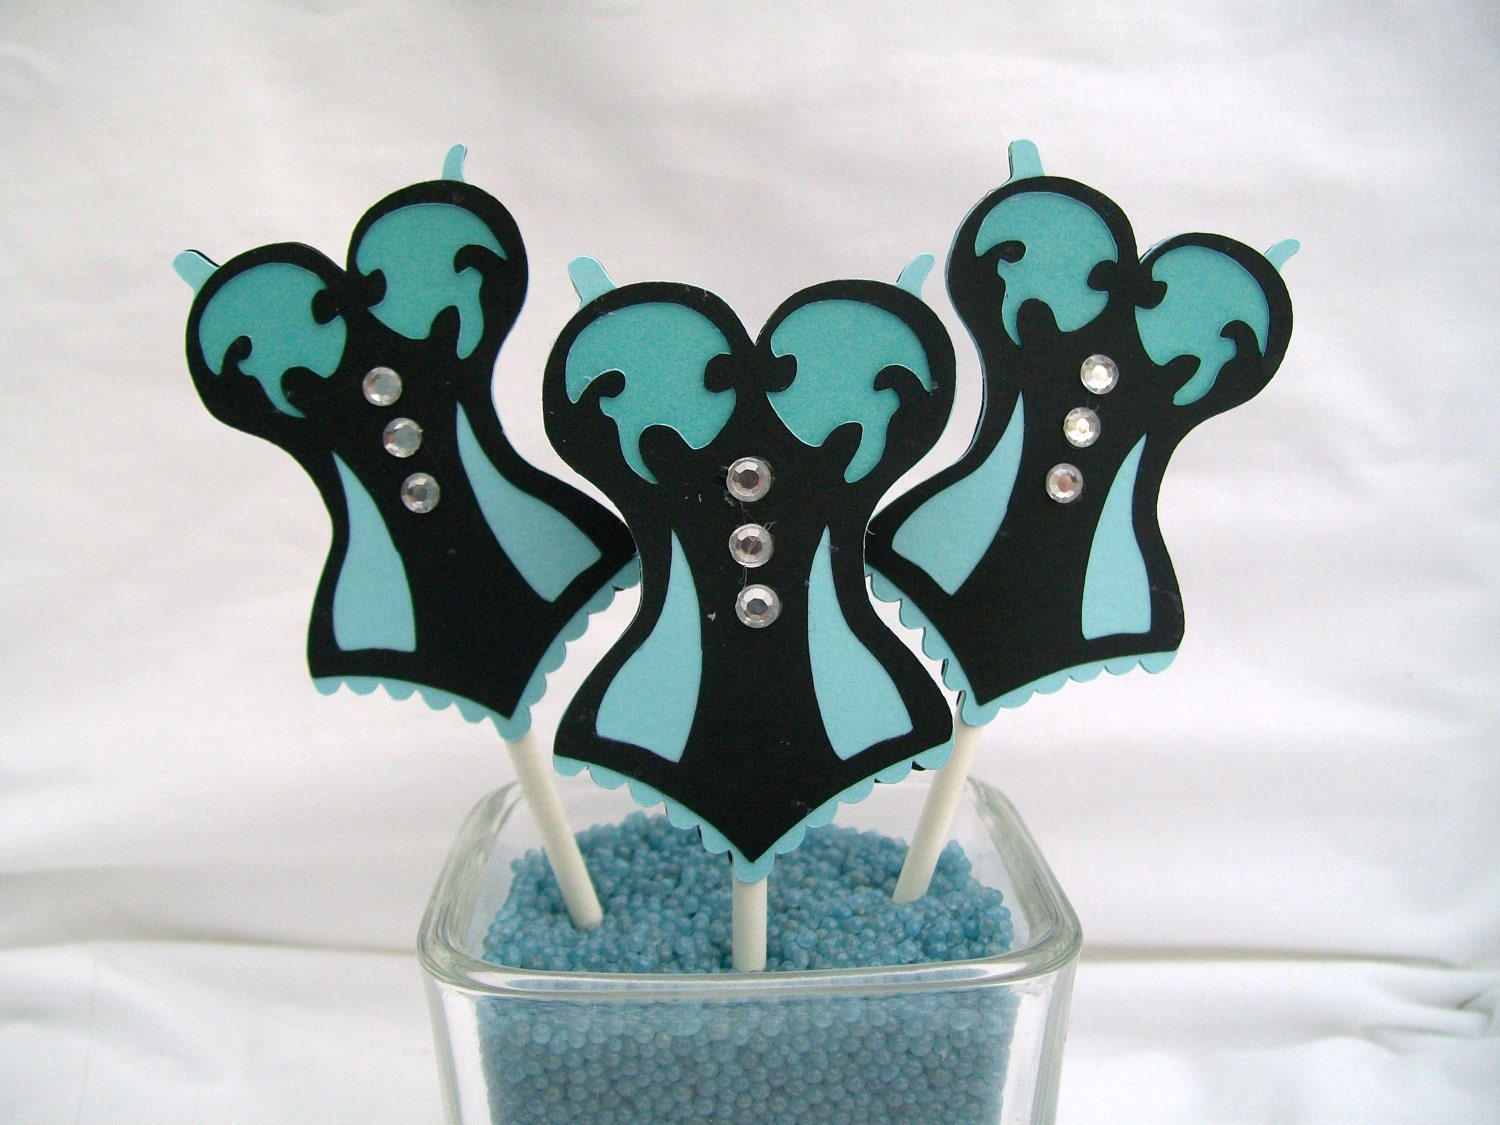 12 corset cupcake toppers in light blue teal and black